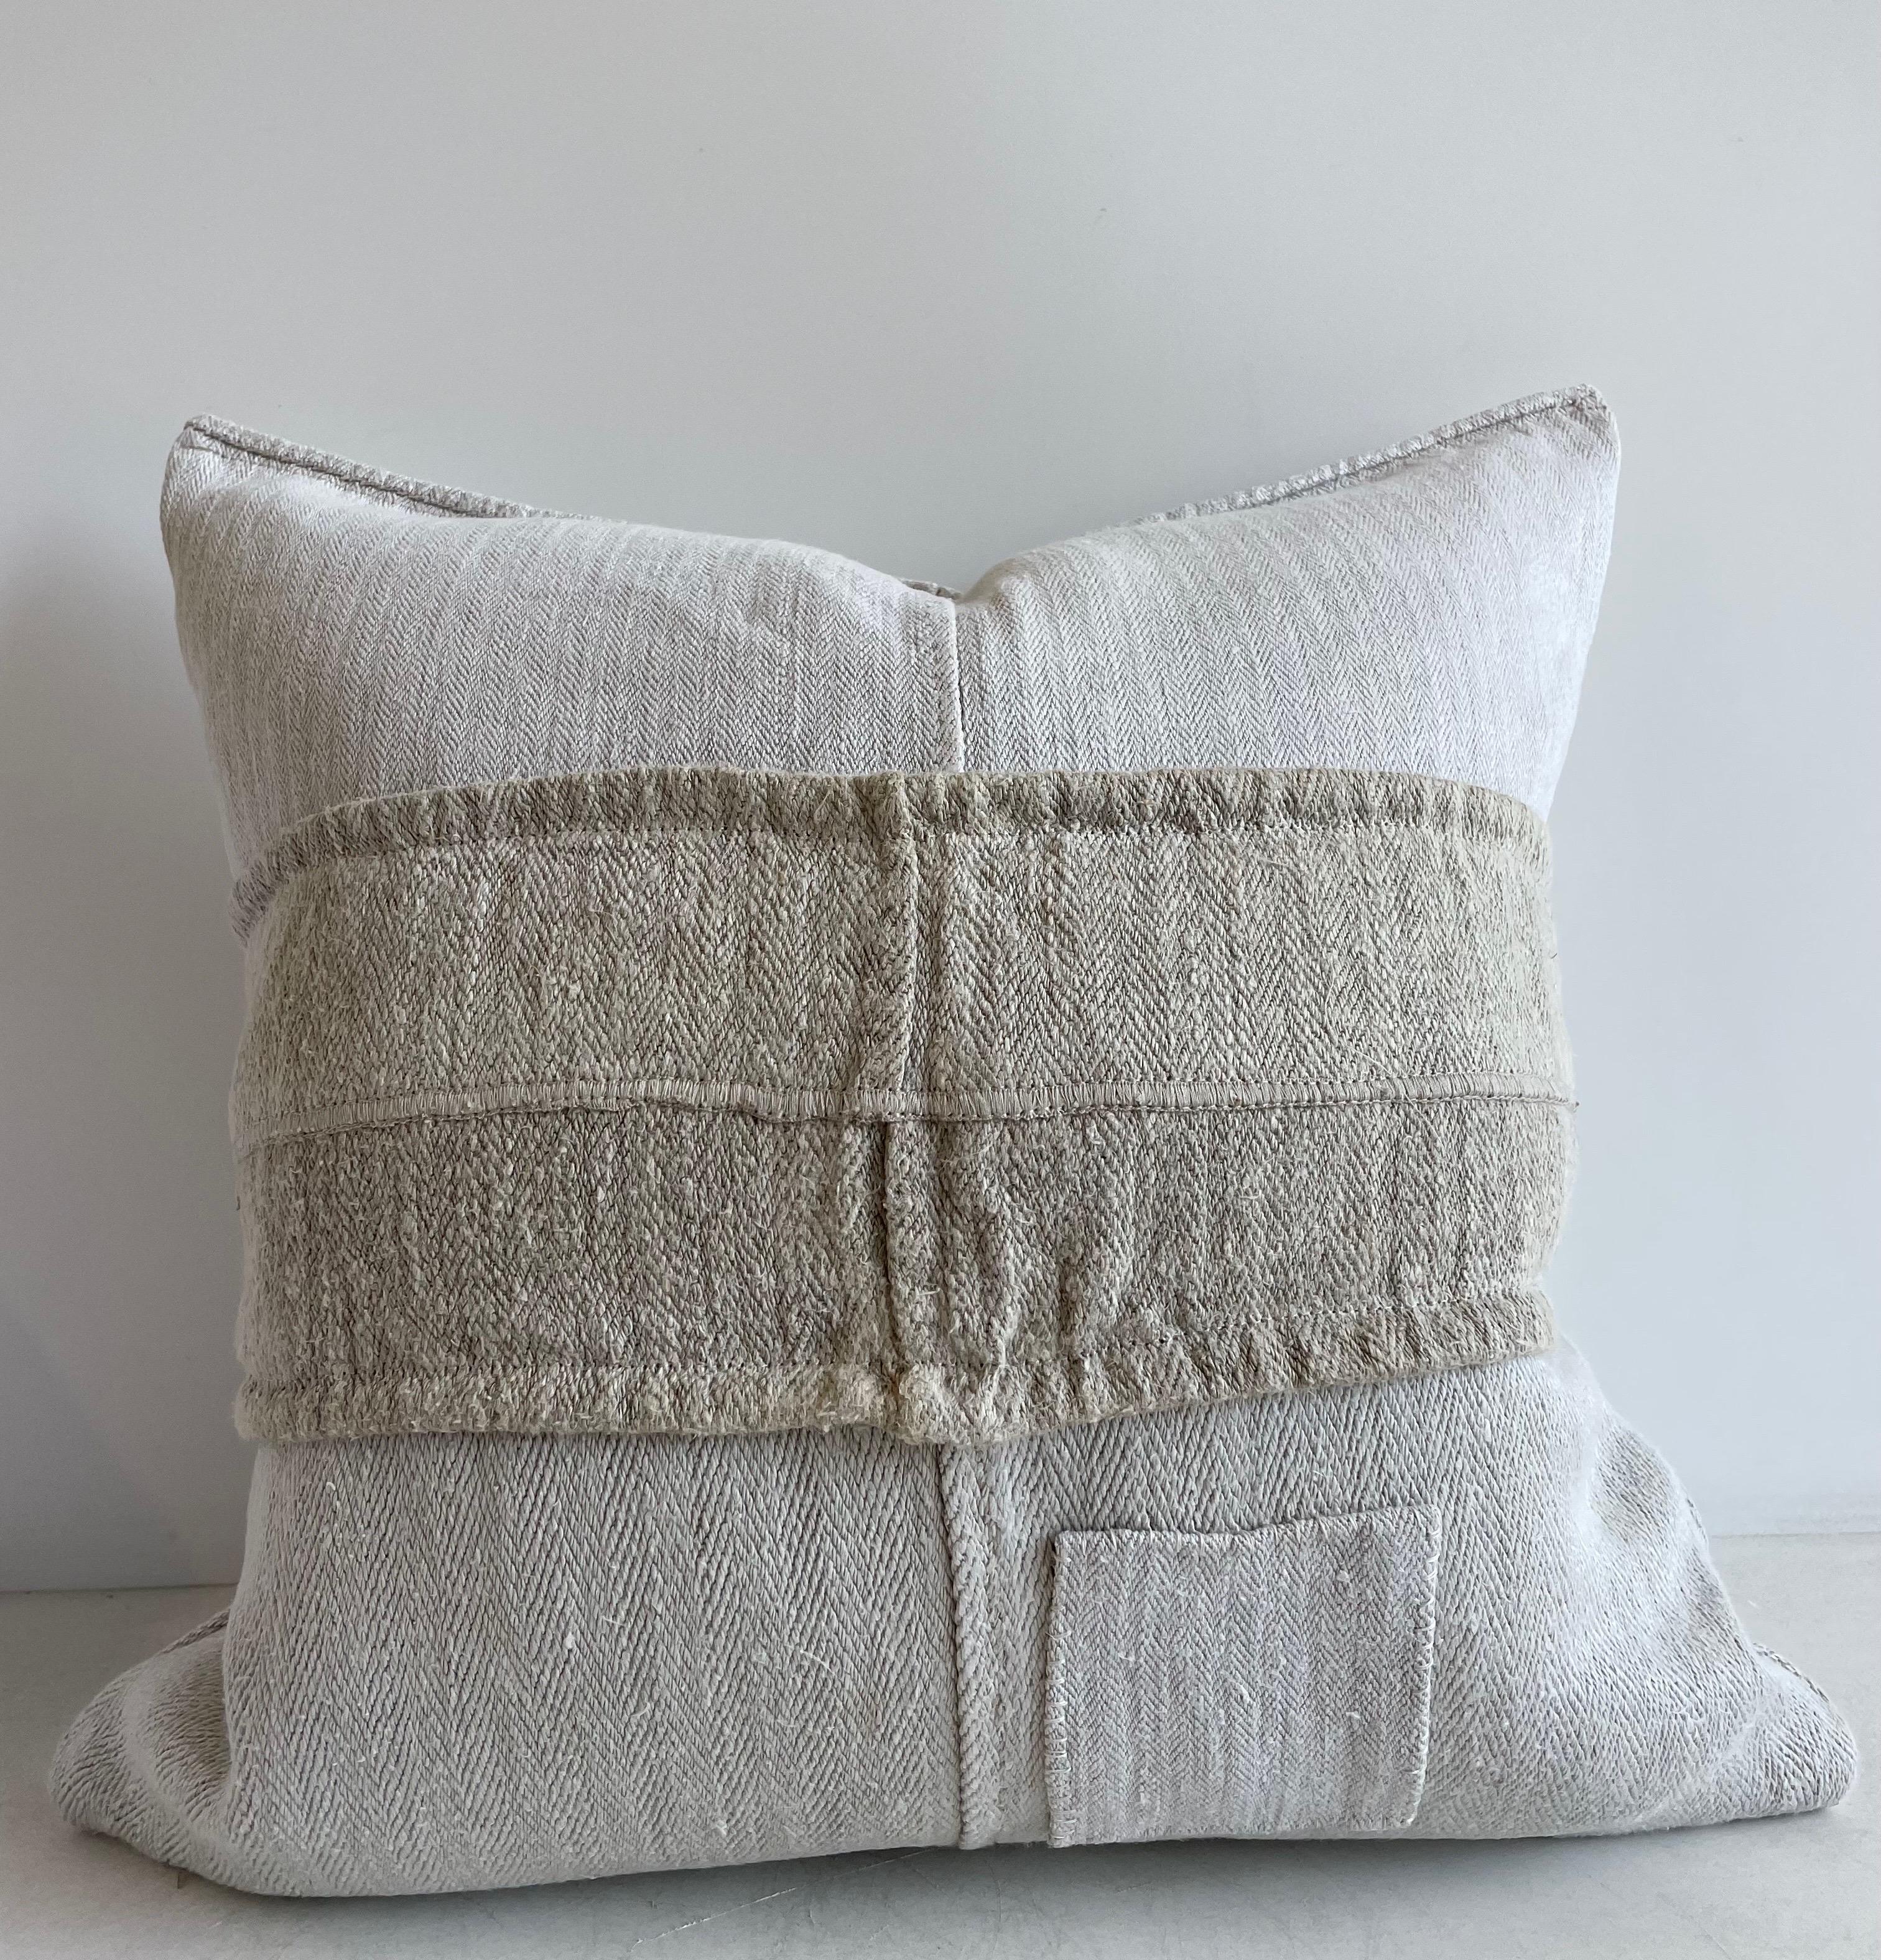 Antique grain sack pillow. Lovely grain feed sack pillows from Europe. We custom-made these out of the original antique feed sacks, with brass zipper closure and overlocked edges. All items have been pre washed, clean and ready to use. Condition: